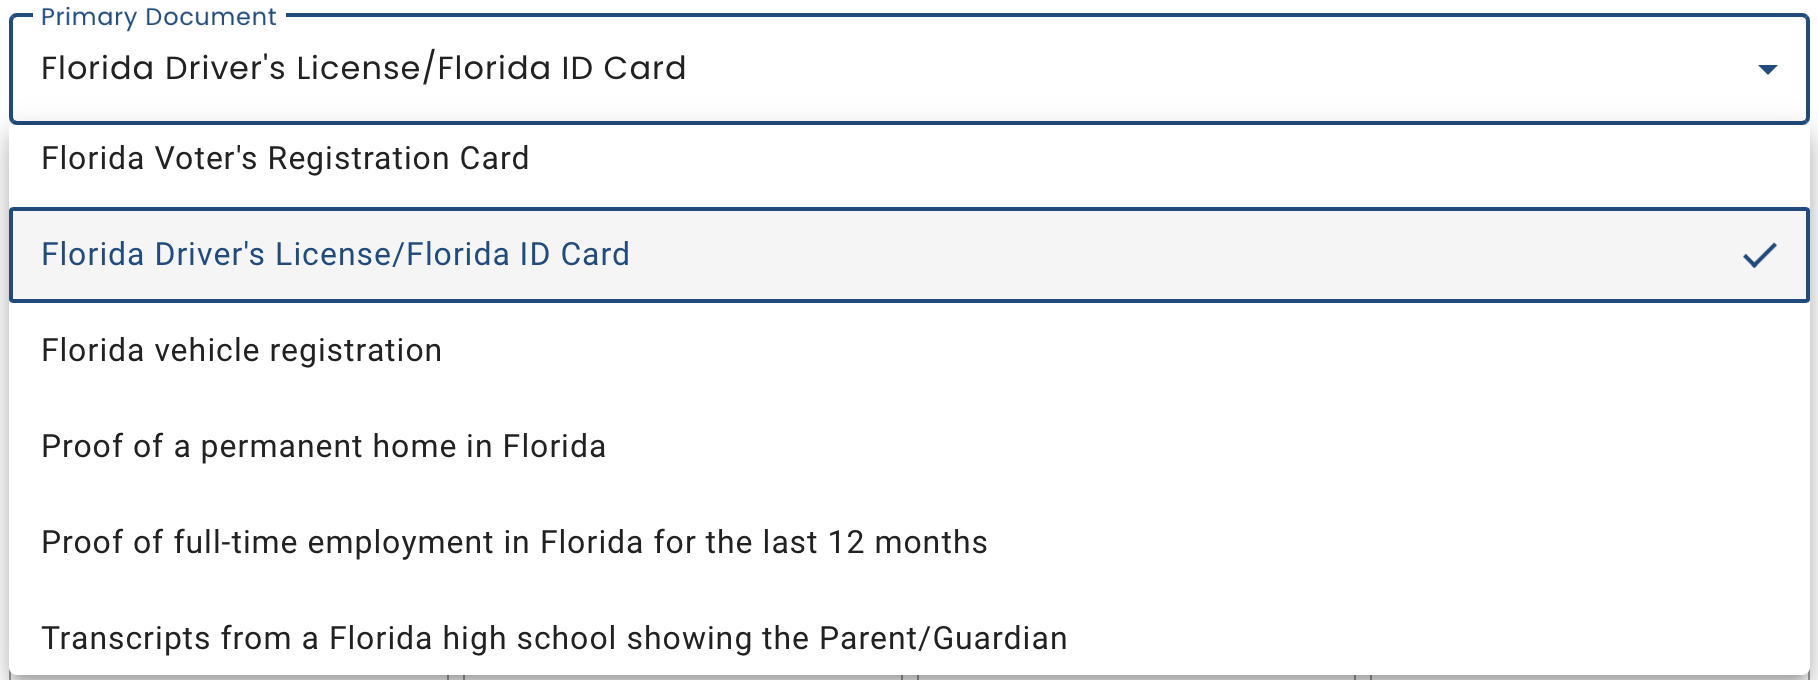 Screenshot showing each of the 6 types of primary documents allowed in FL